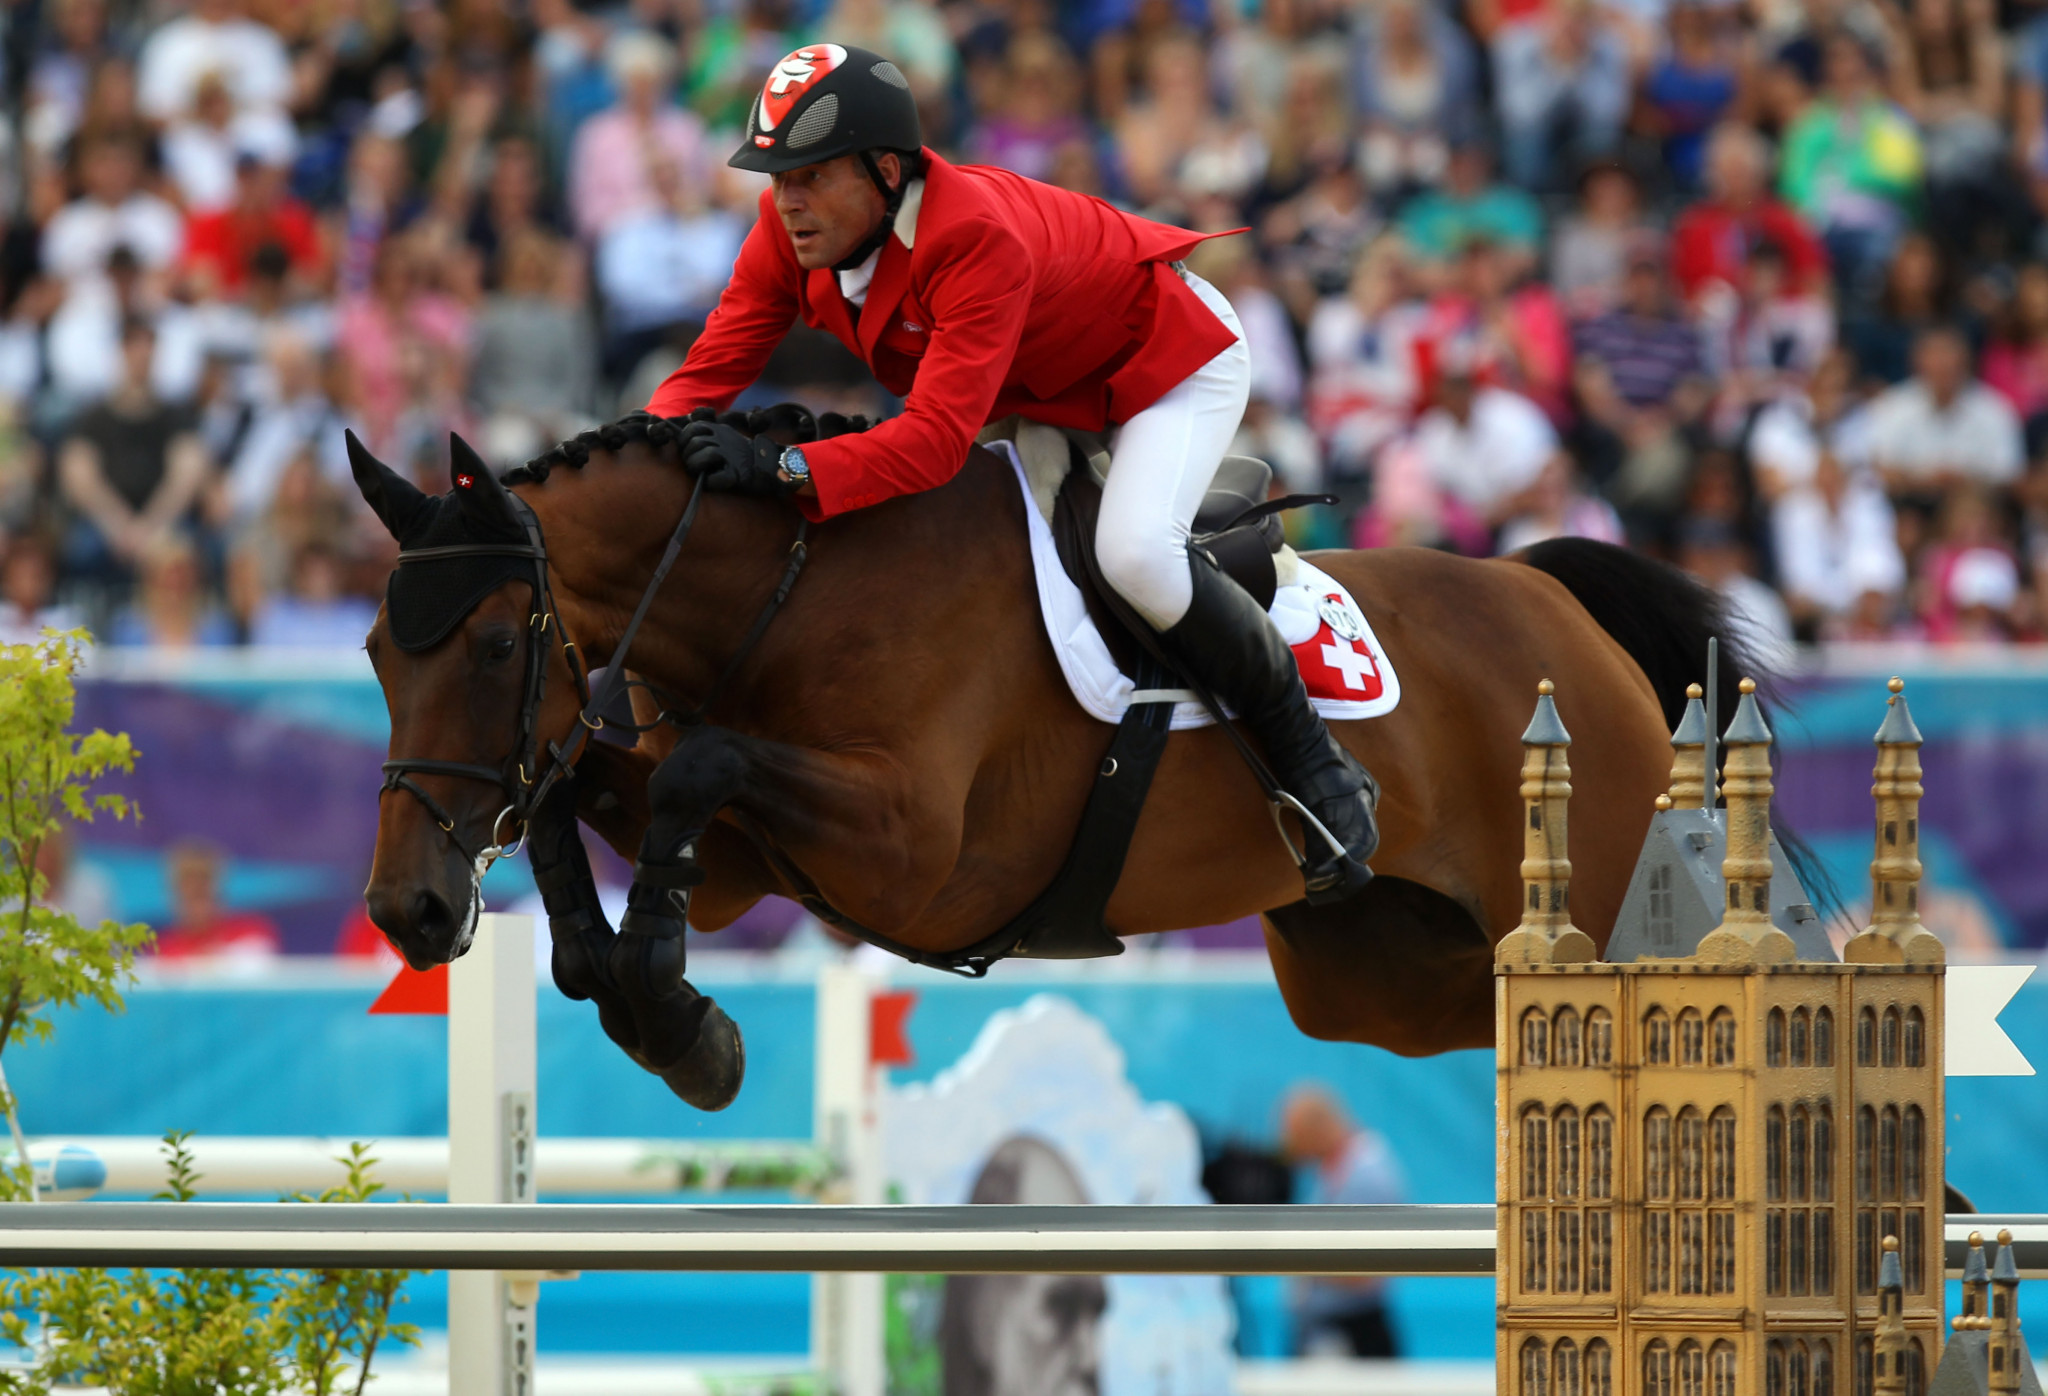 Olympic showjumper Estermann faces provisional suspension after being found guilty of animal cruelty 